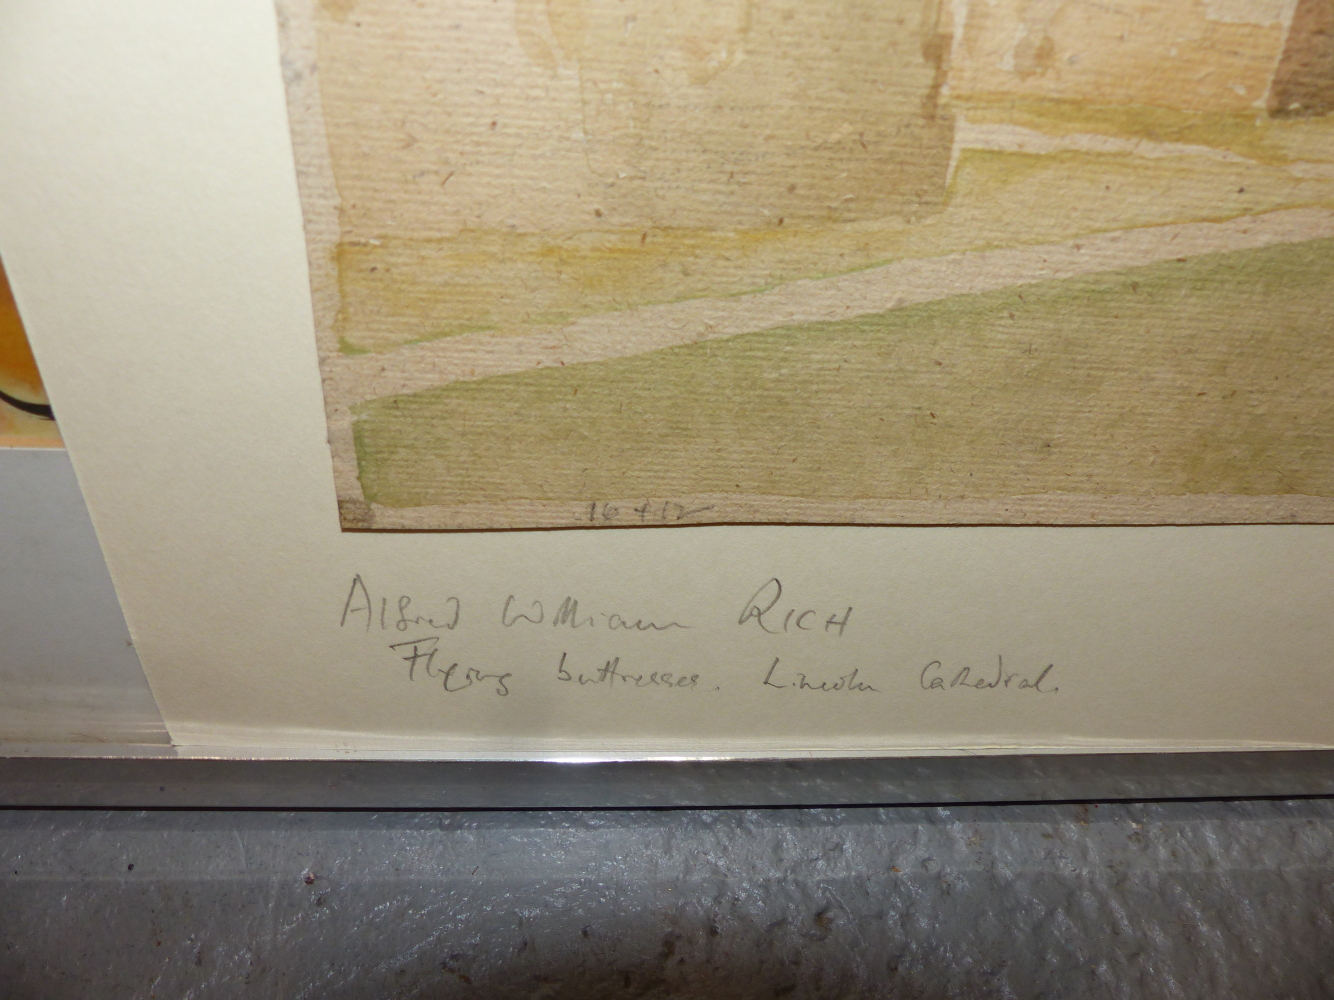 ALFRED WILLIAM RICH N.E.A.C. (1856-1921), FLYING BUTTRESSES AT LINCOLN CATHEDRAL, SIGNED, - Image 5 of 5